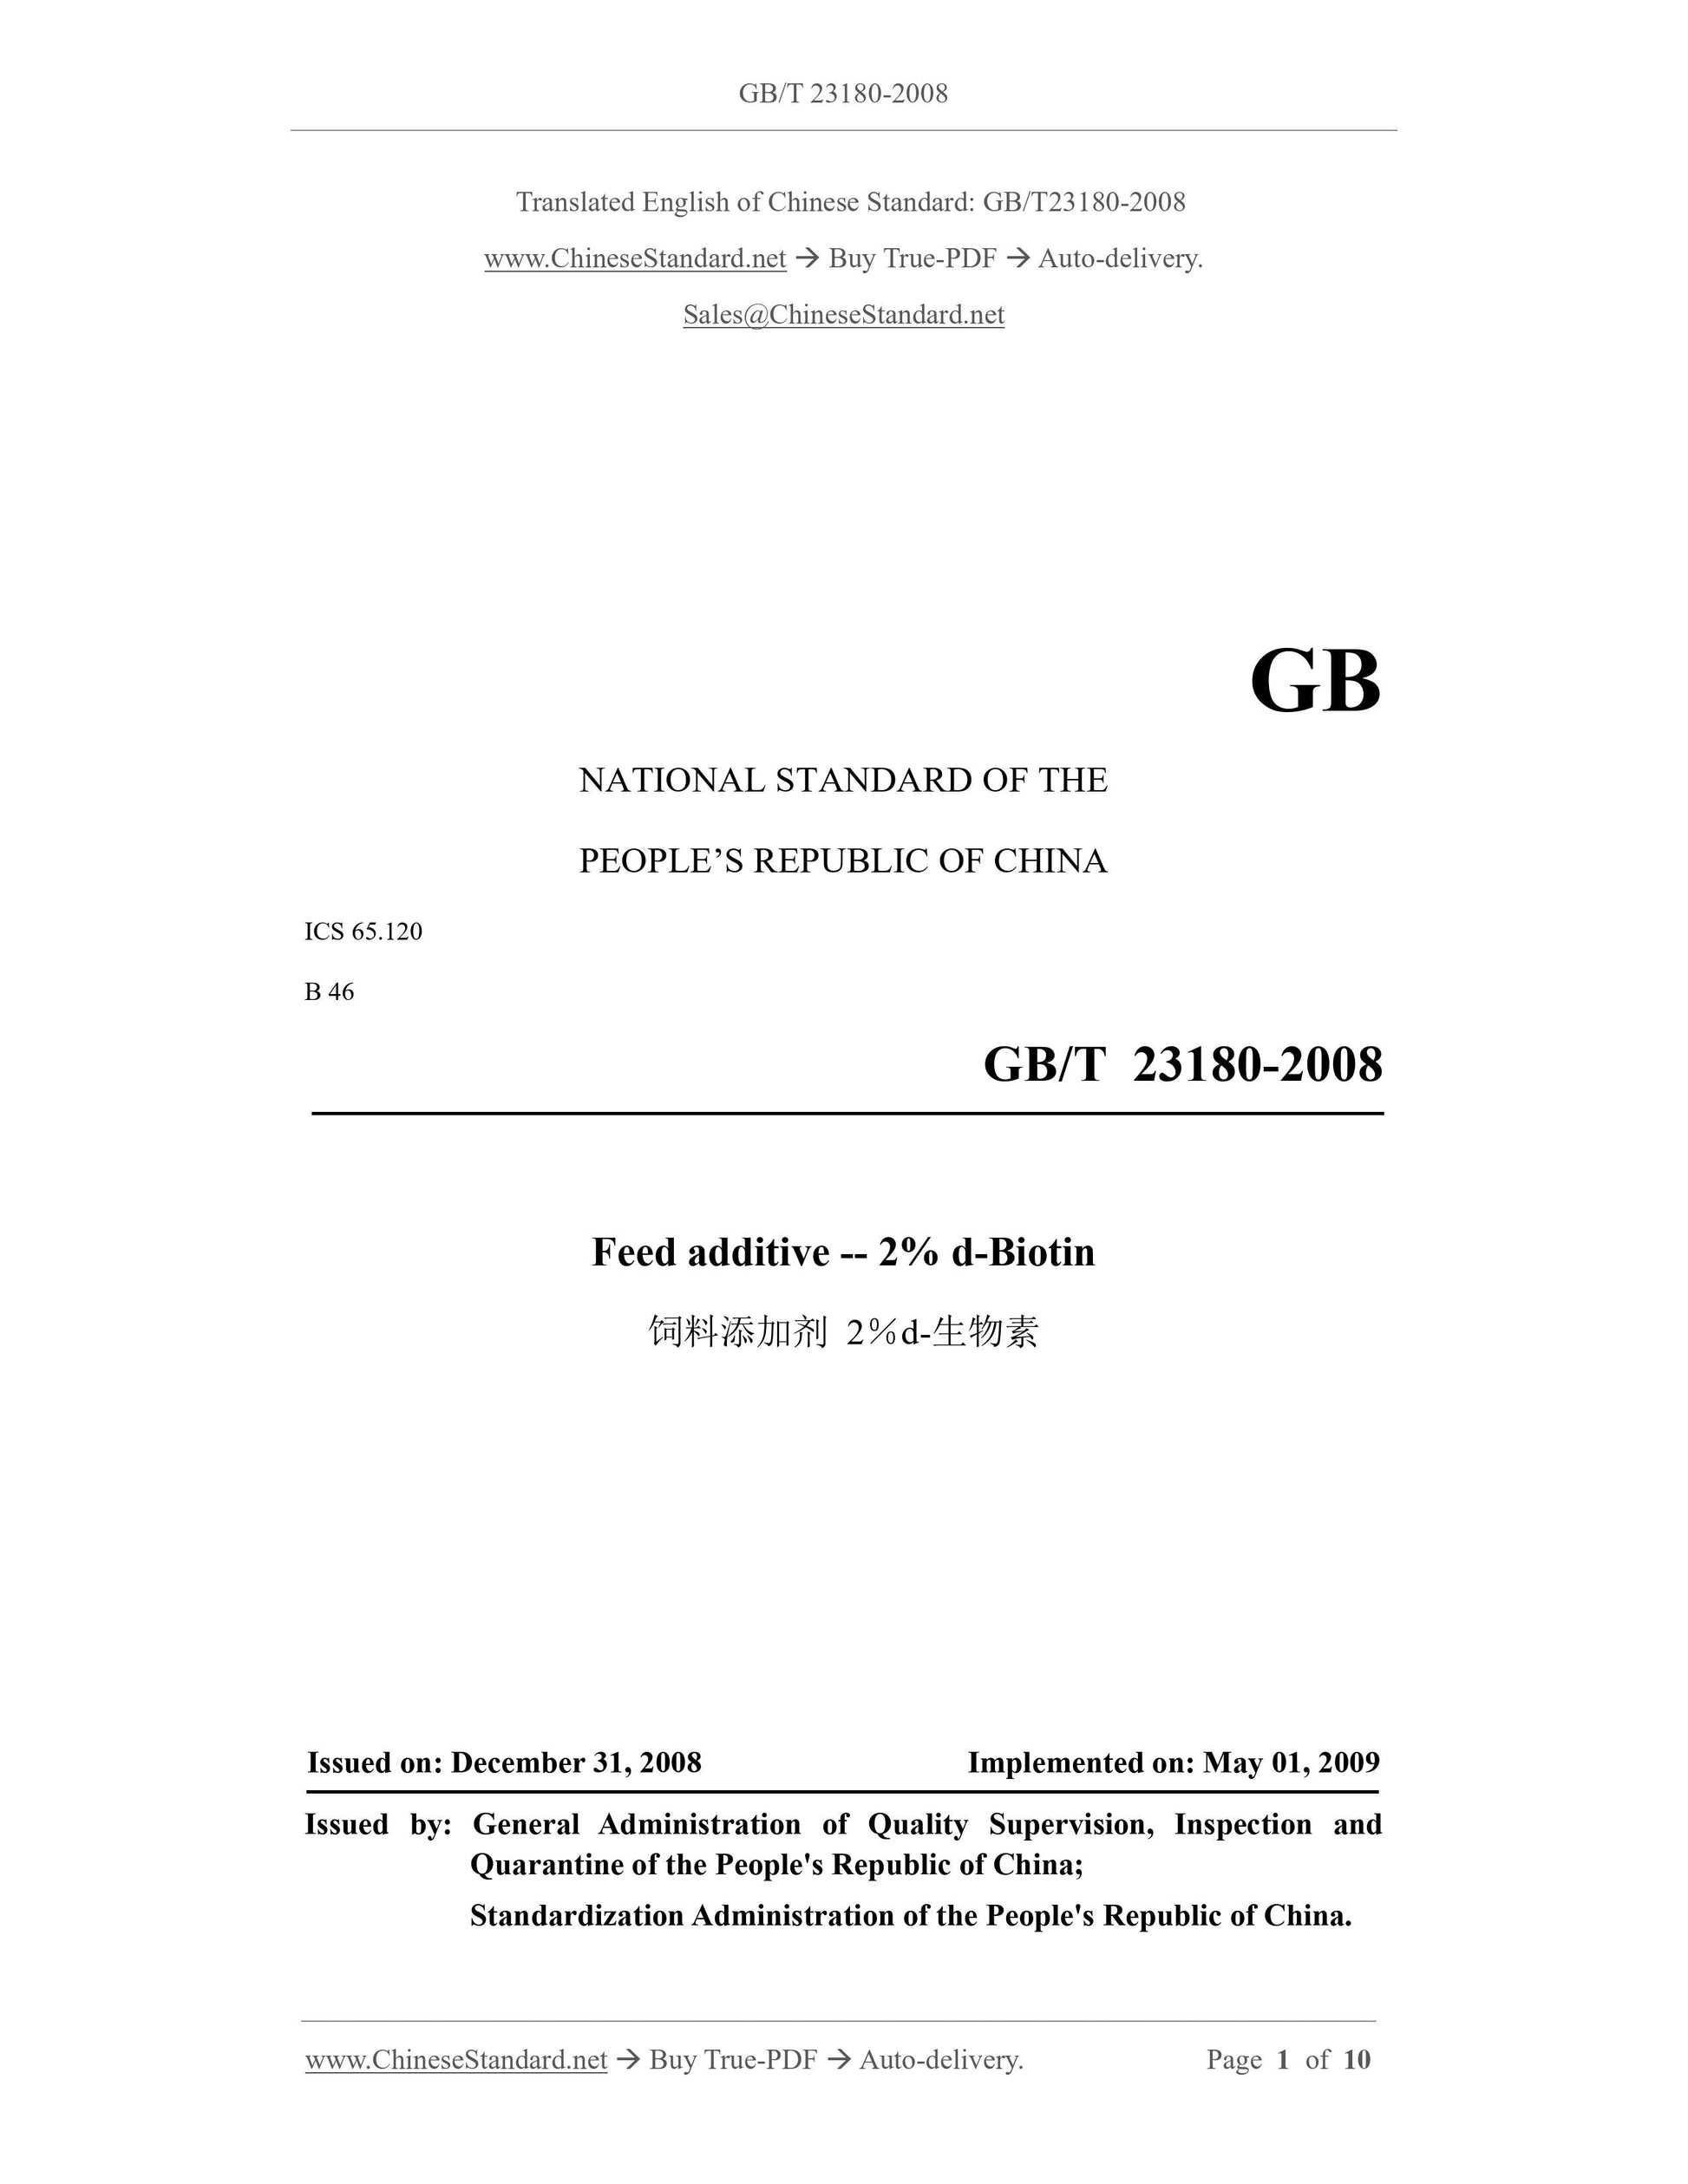 GB/T 23180-2008 Page 1